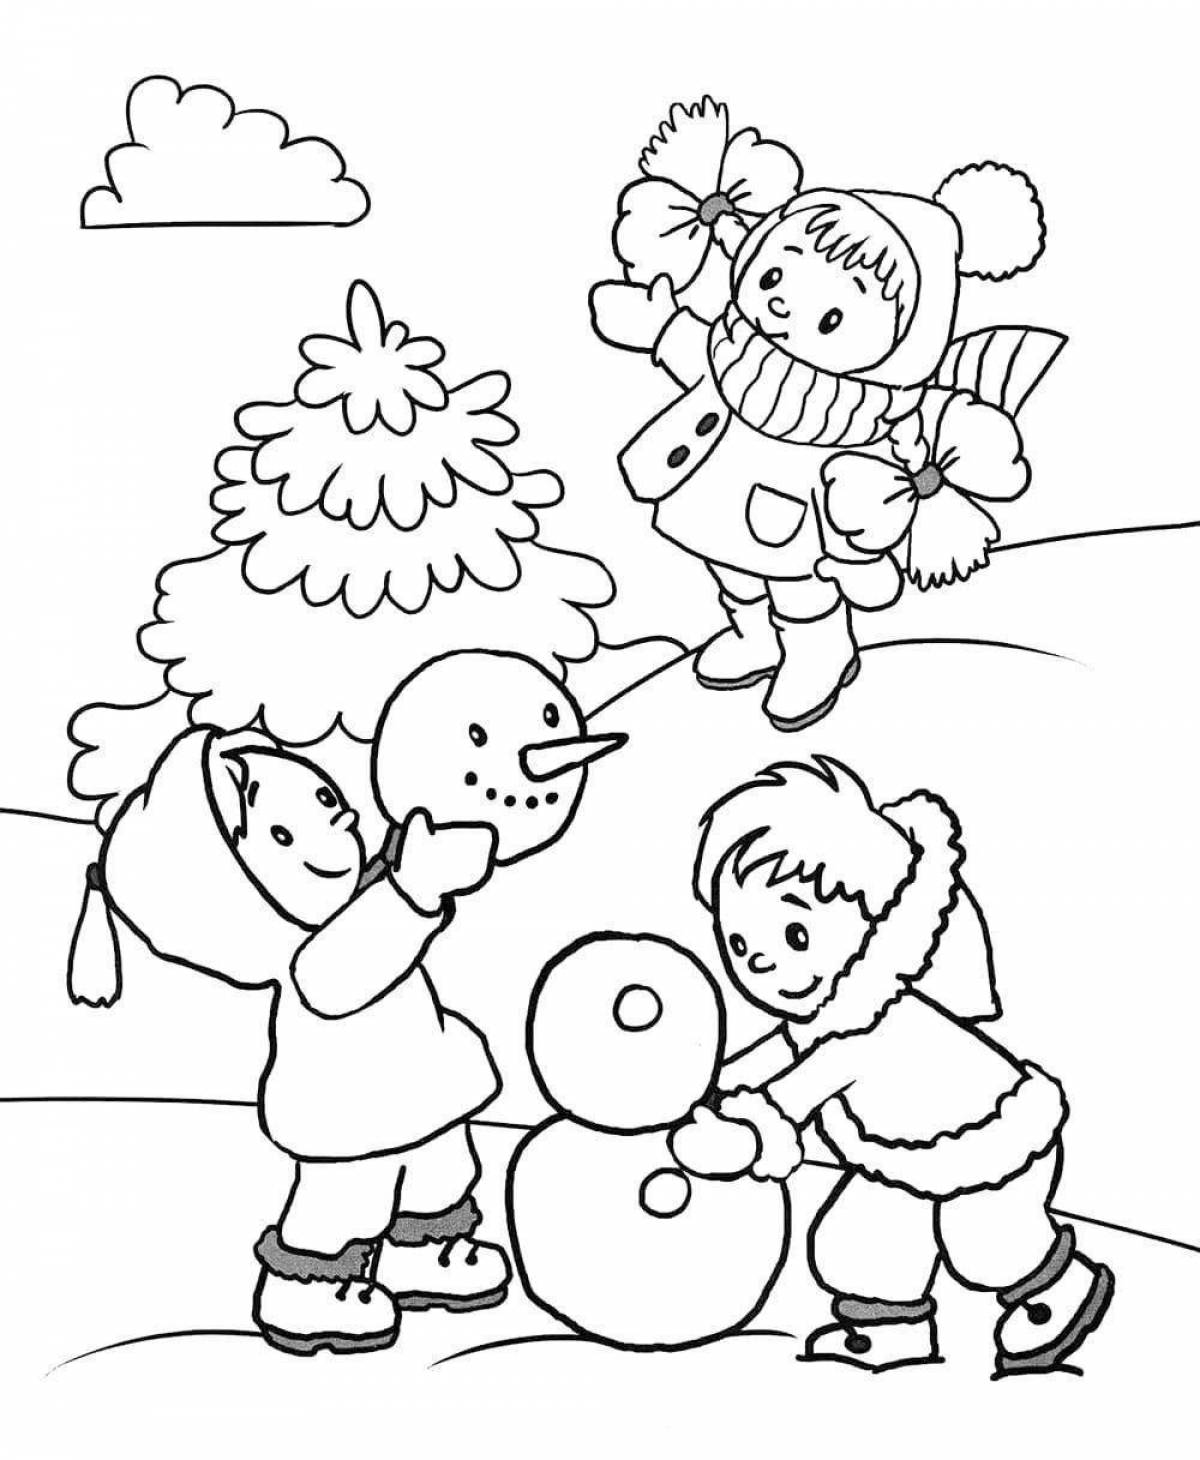 Colorful Christmas coloring game